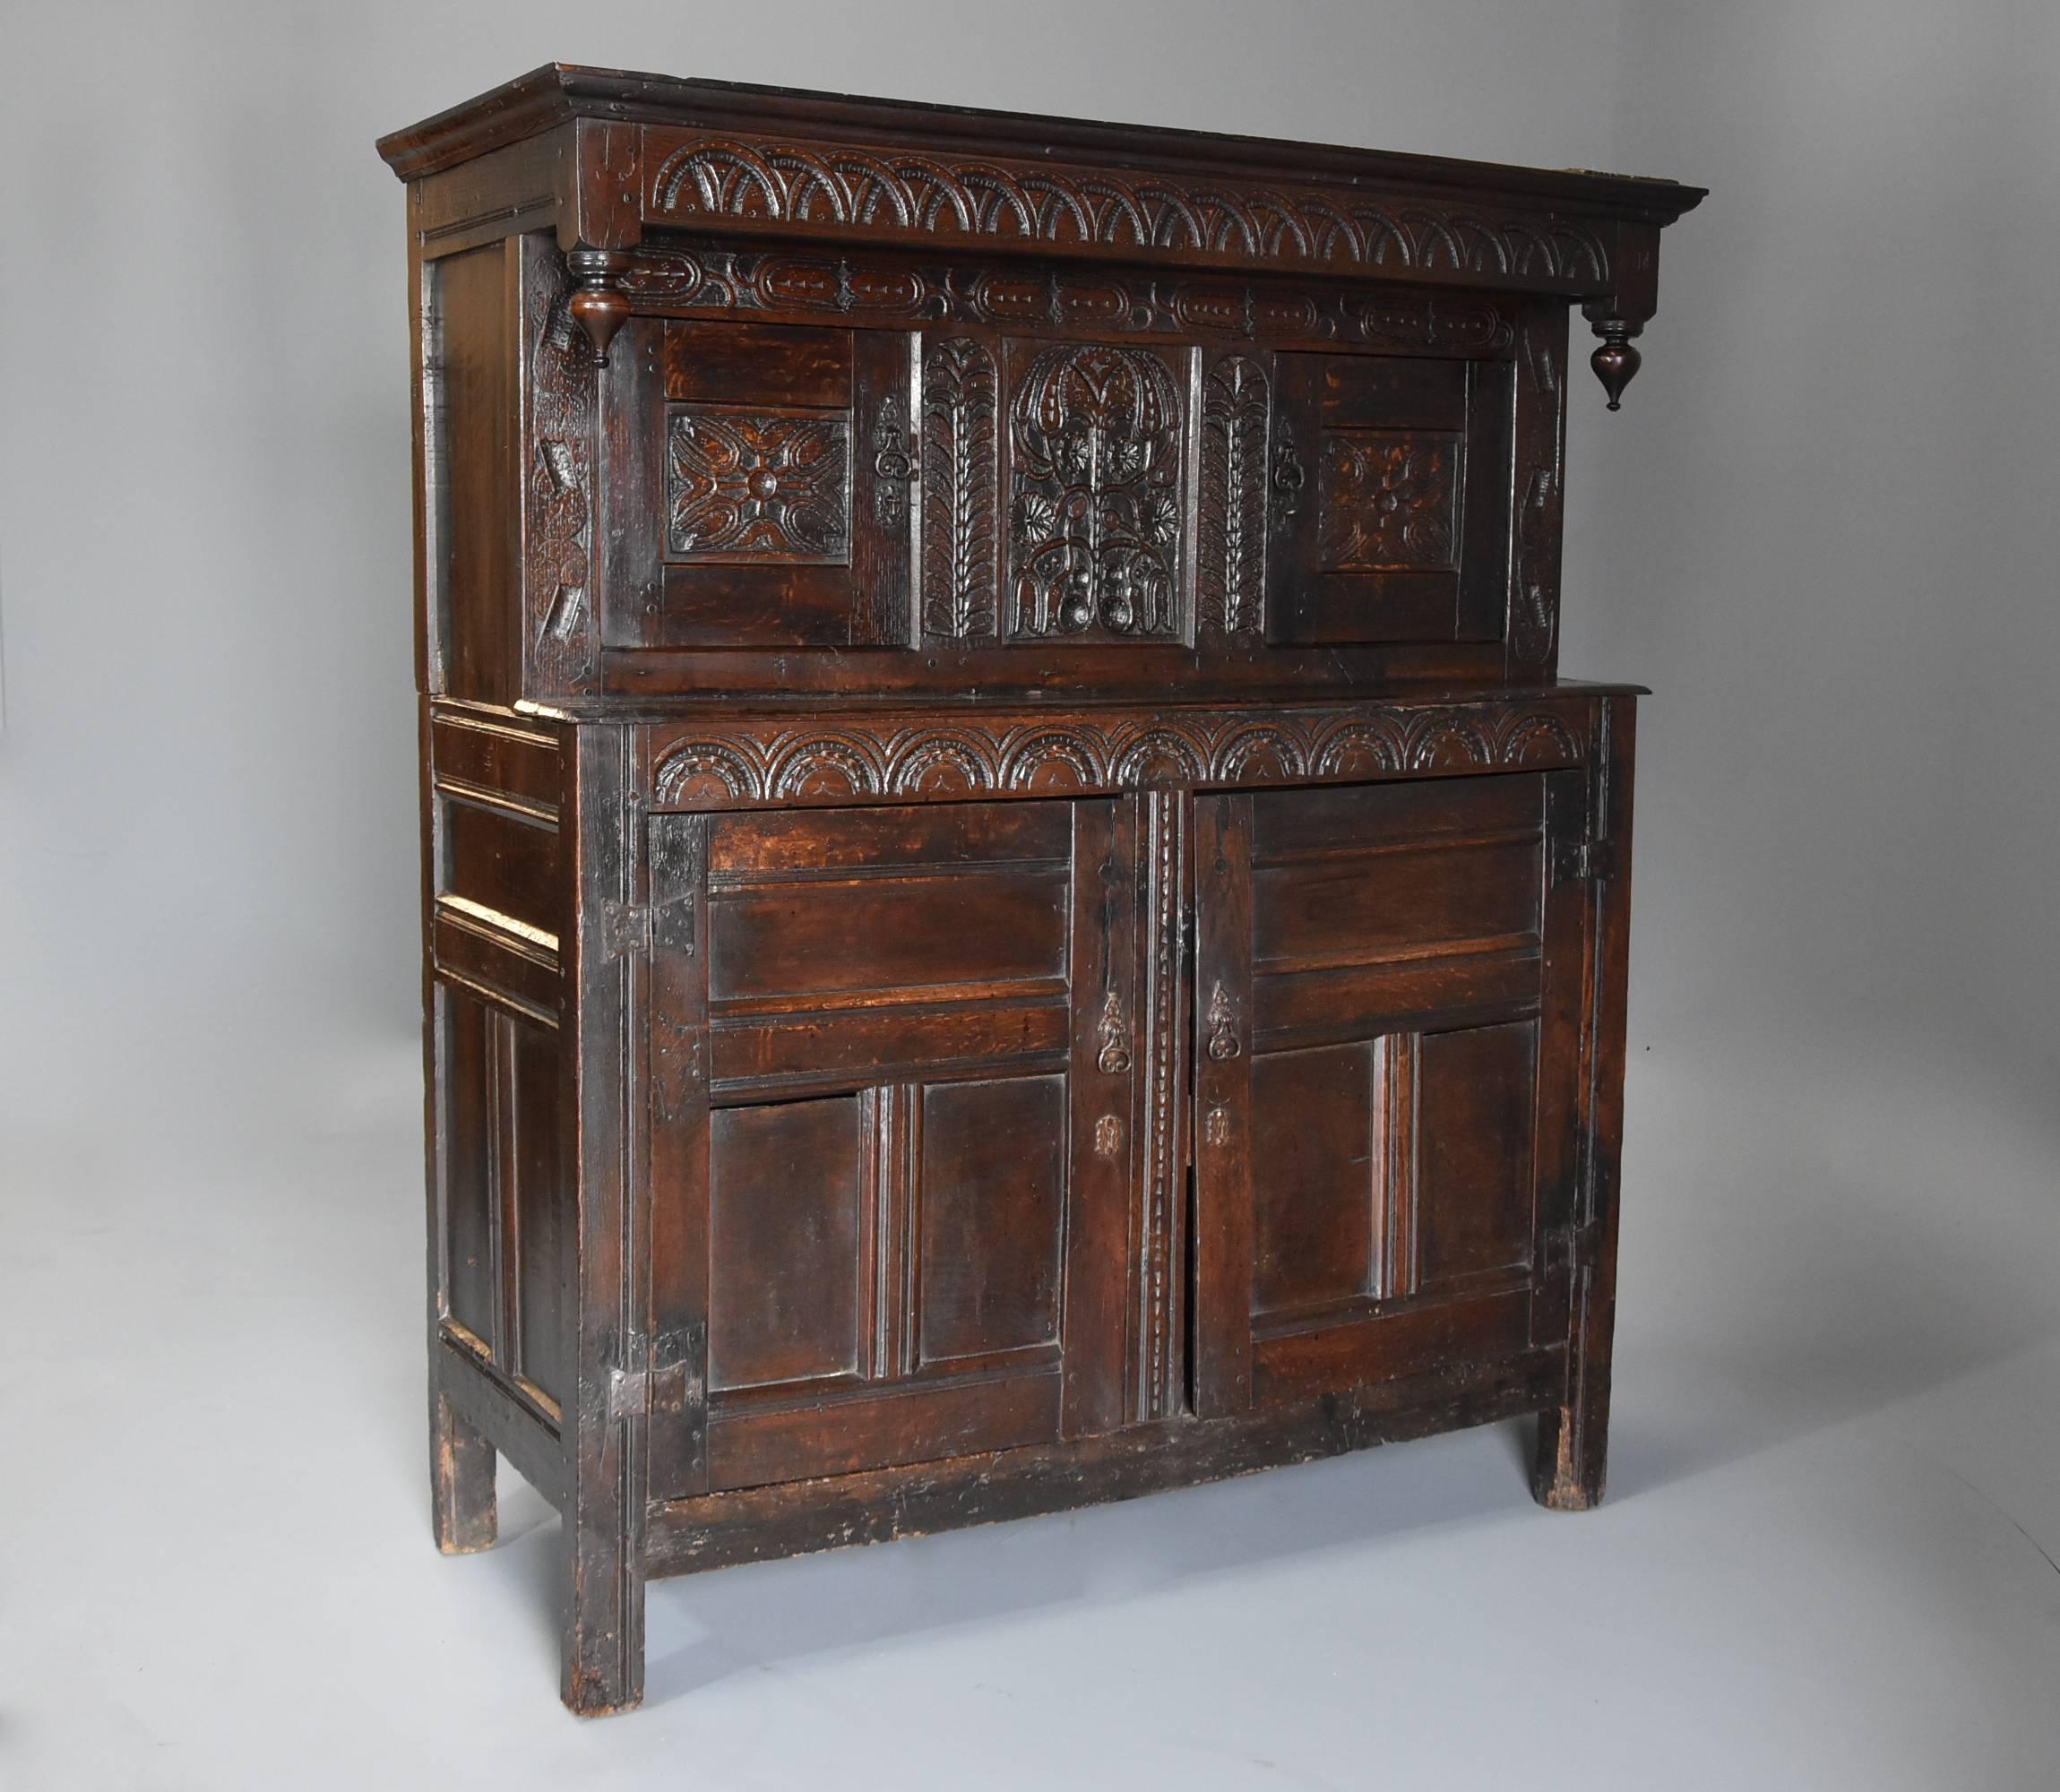 A wonderful example of a mid-17th century (circa 1660) carved oak press cupboard in original, untouched condition with superb original patina (color).

This cupboard consists of a frieze with carved lunette decoration and carved drop finials, on